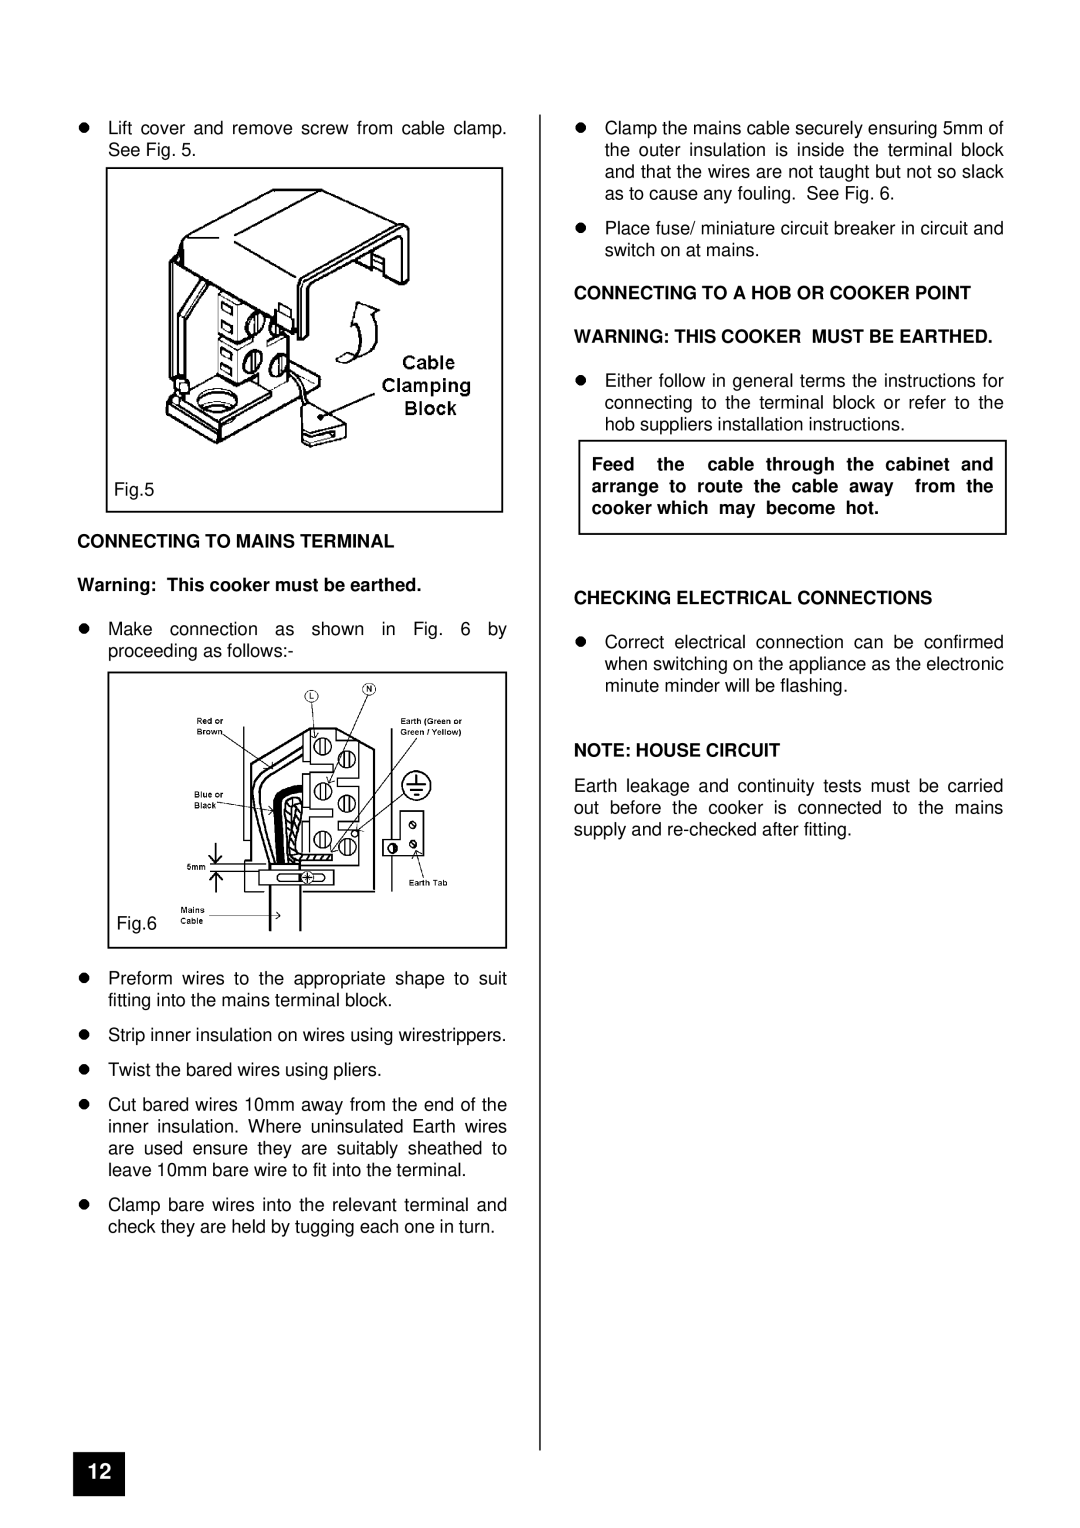 Moffat MD 900 B/W installation instructions Connecting to Mains Terminal, Connecting to a HOB or Cooker Point 